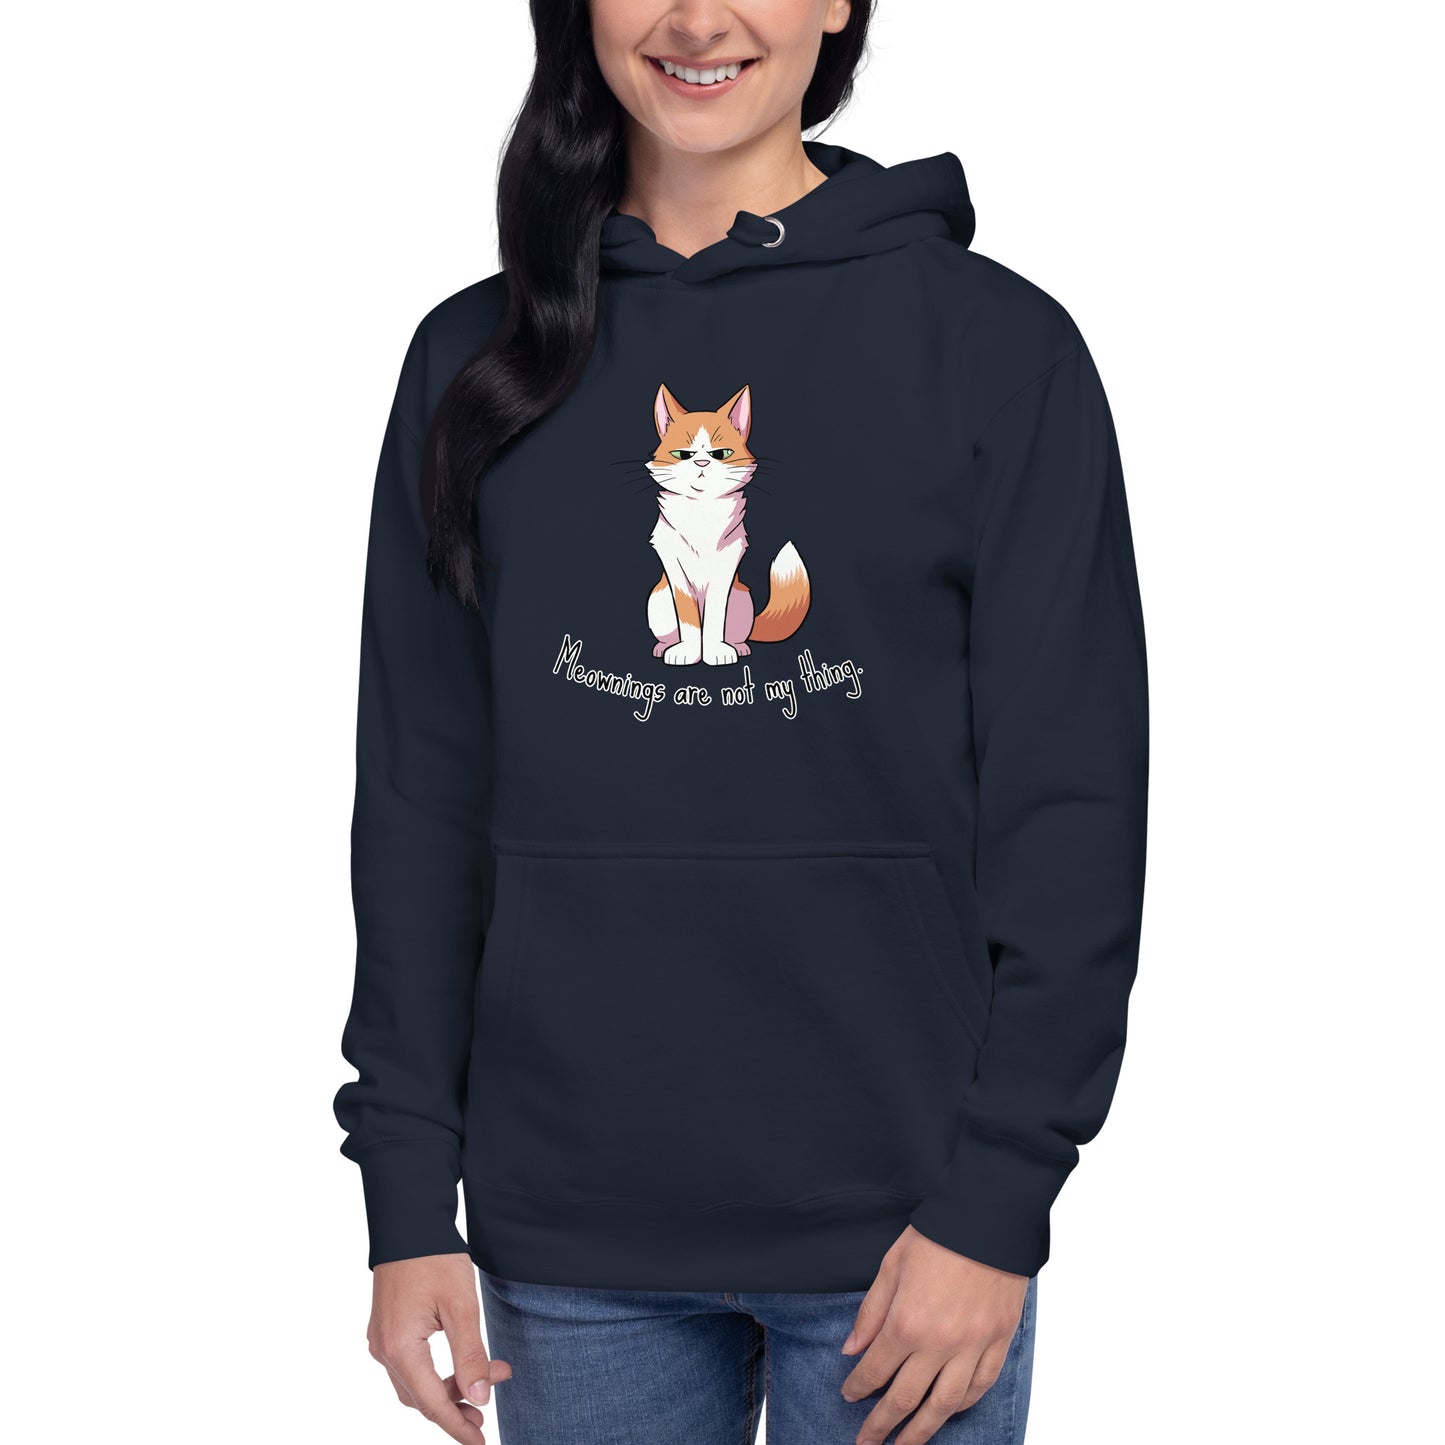 Ginger - Meowings are not my thing Unisex Hoodie